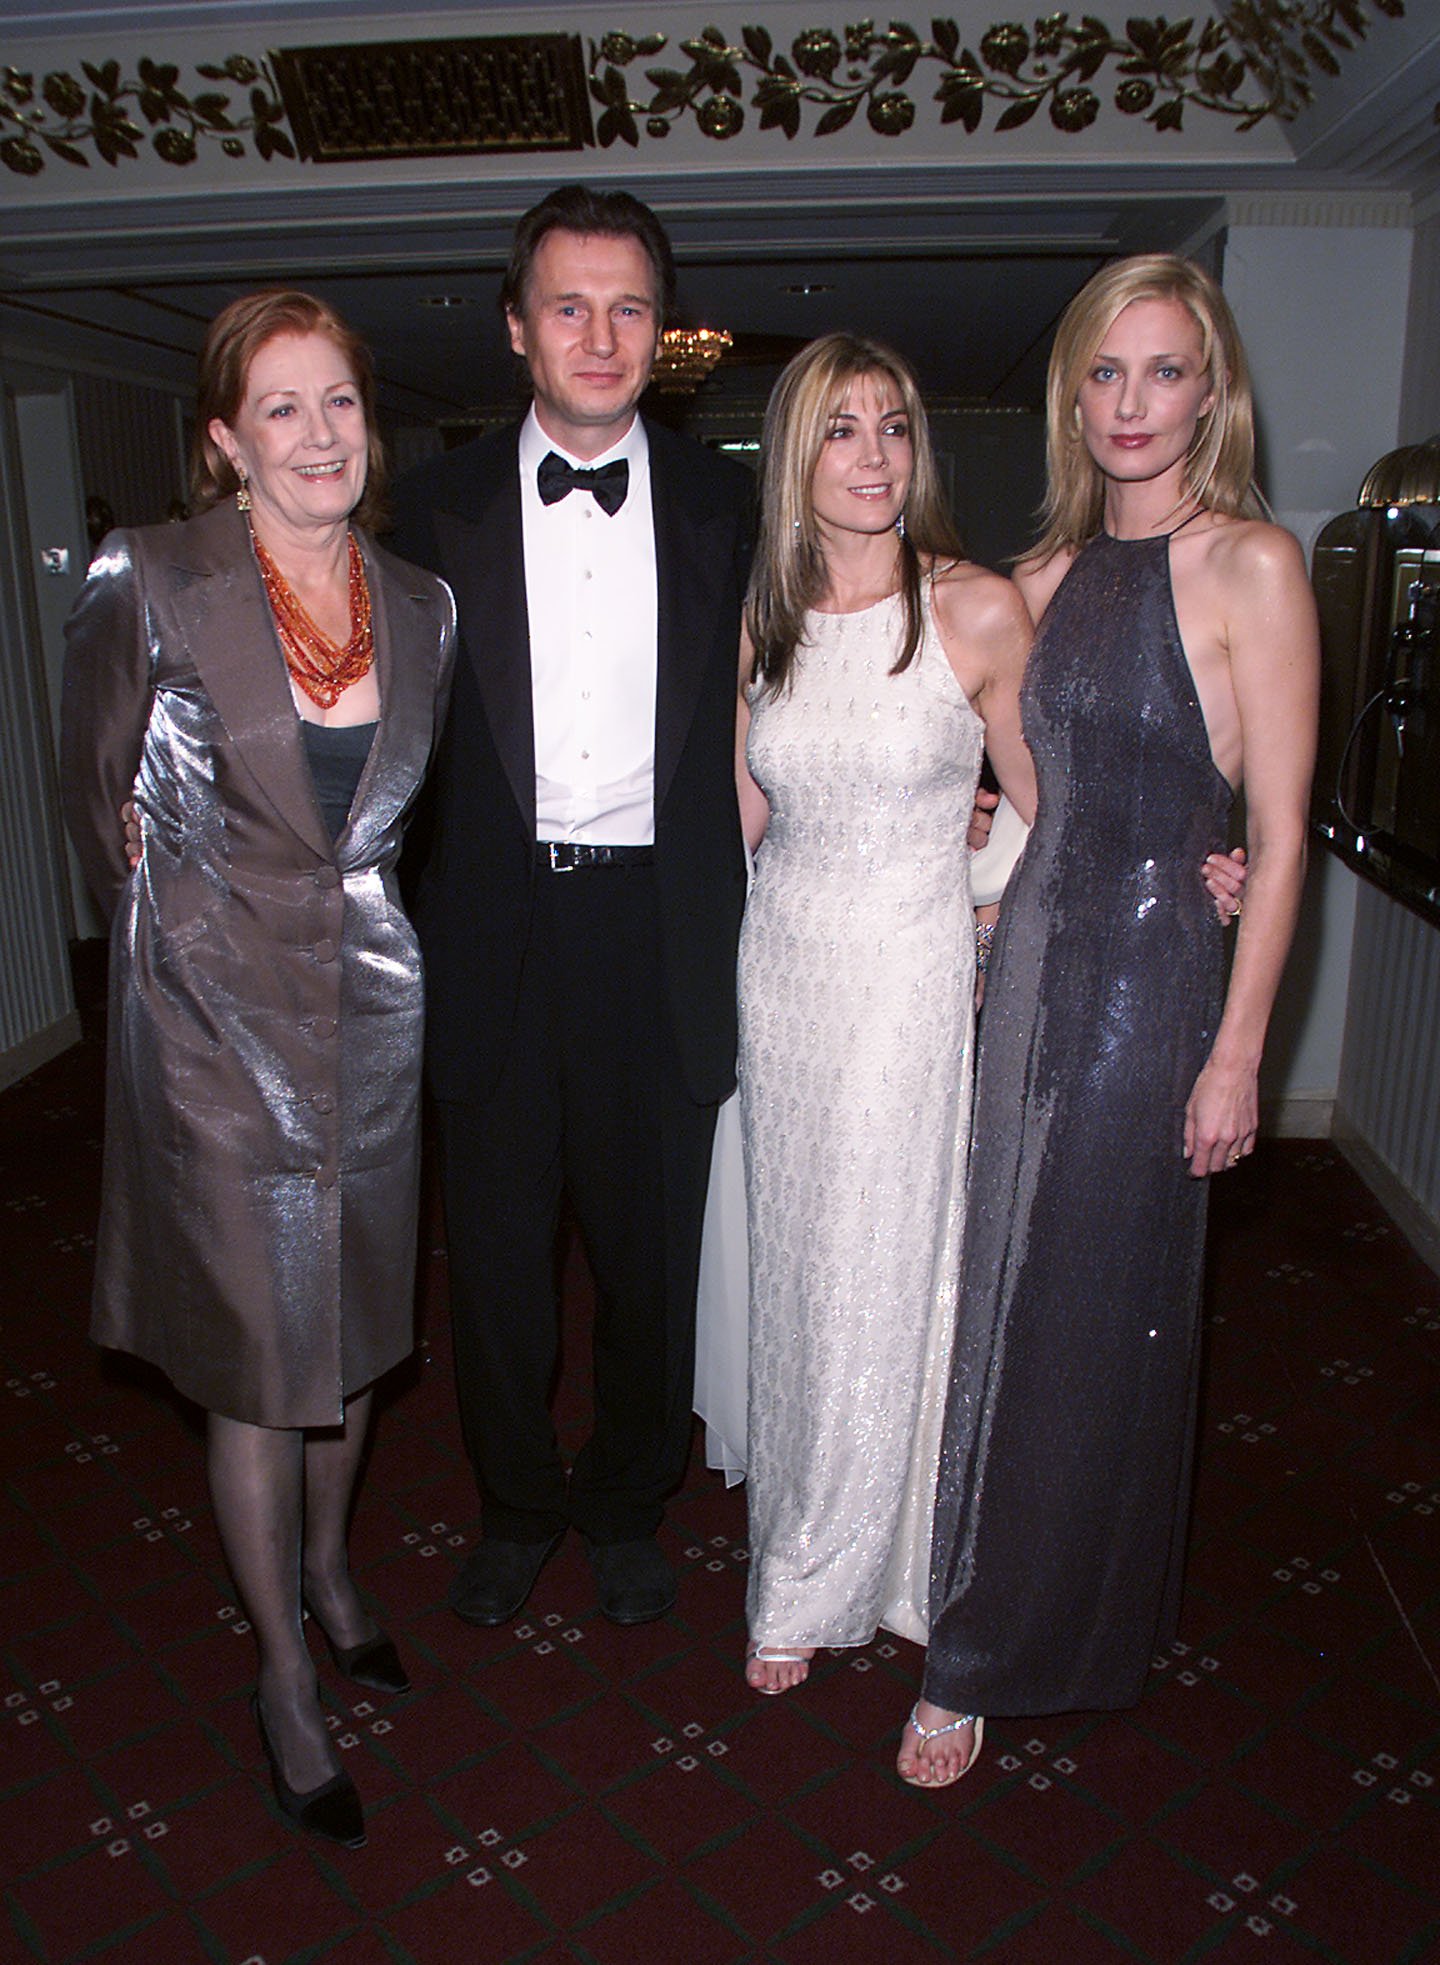 Liam Neeson & Natasha Richardson, with her sister, Joely Richardson & their Mother, Vanessa Redgrave in New York City on November 14, 2000 | Source: Getty Images